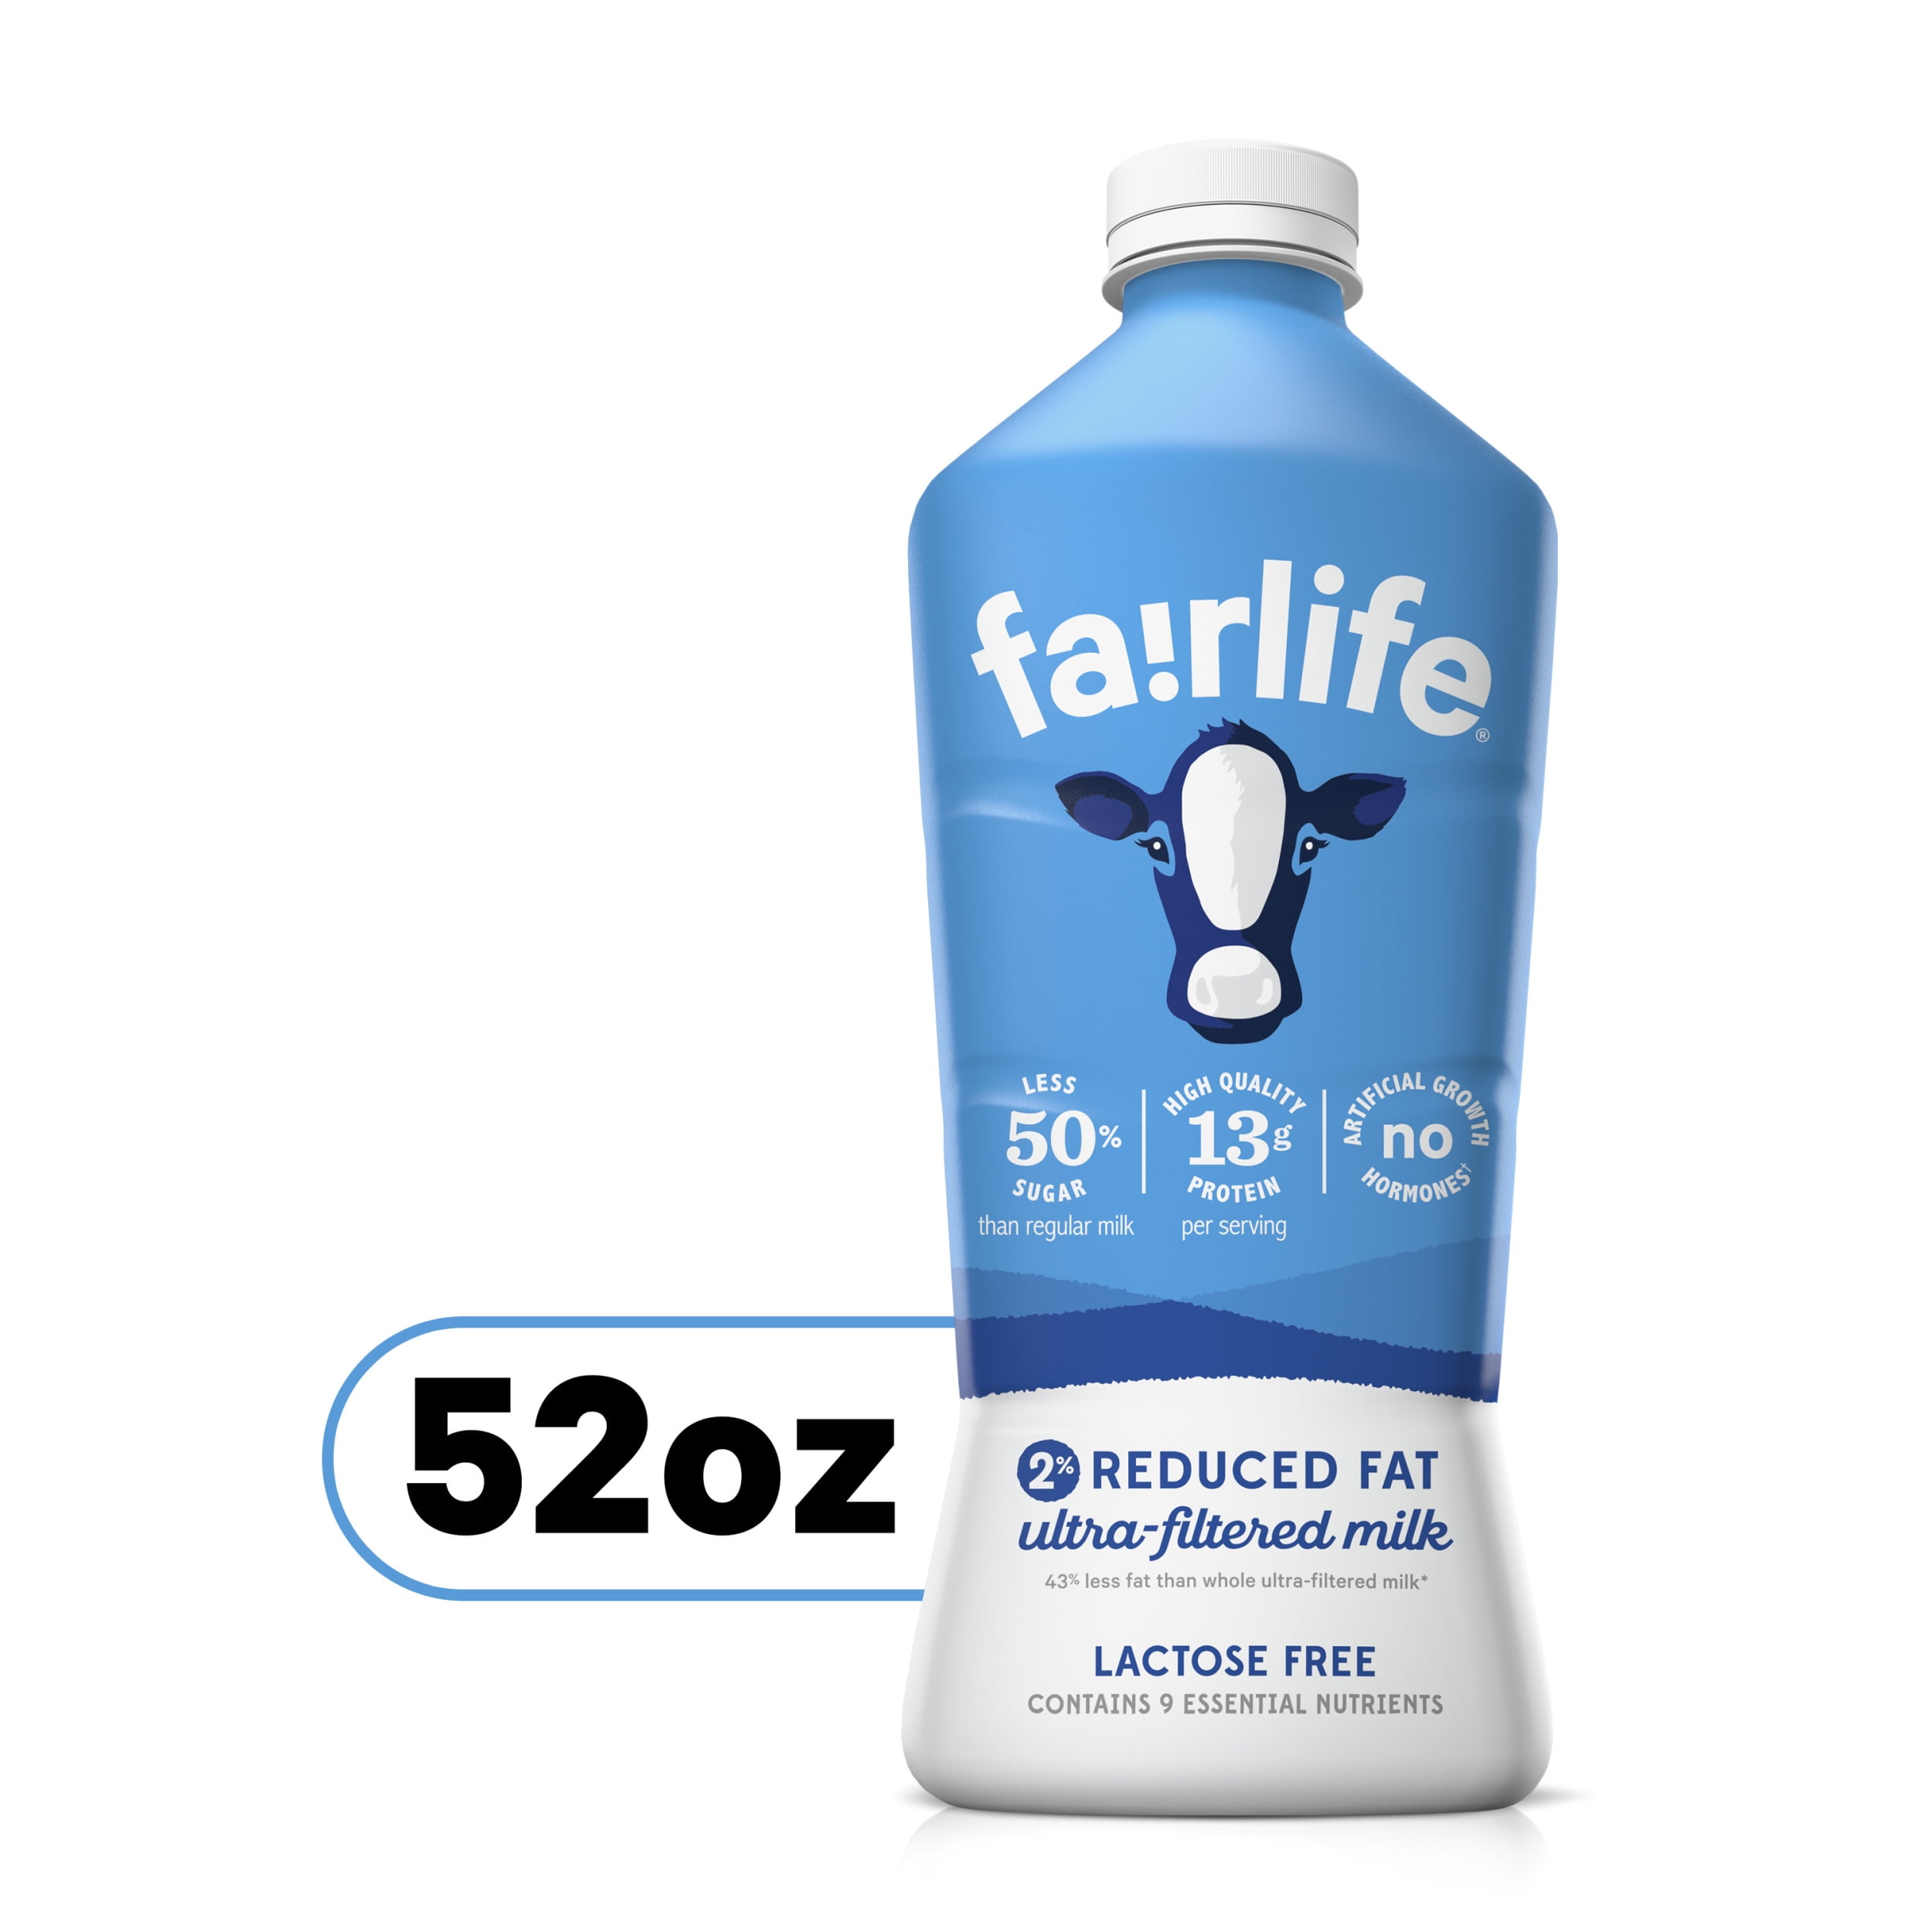 Fairlife 2 Reduced Fat Ultra Filtered Milk Lactose Free 52 Fl Oz